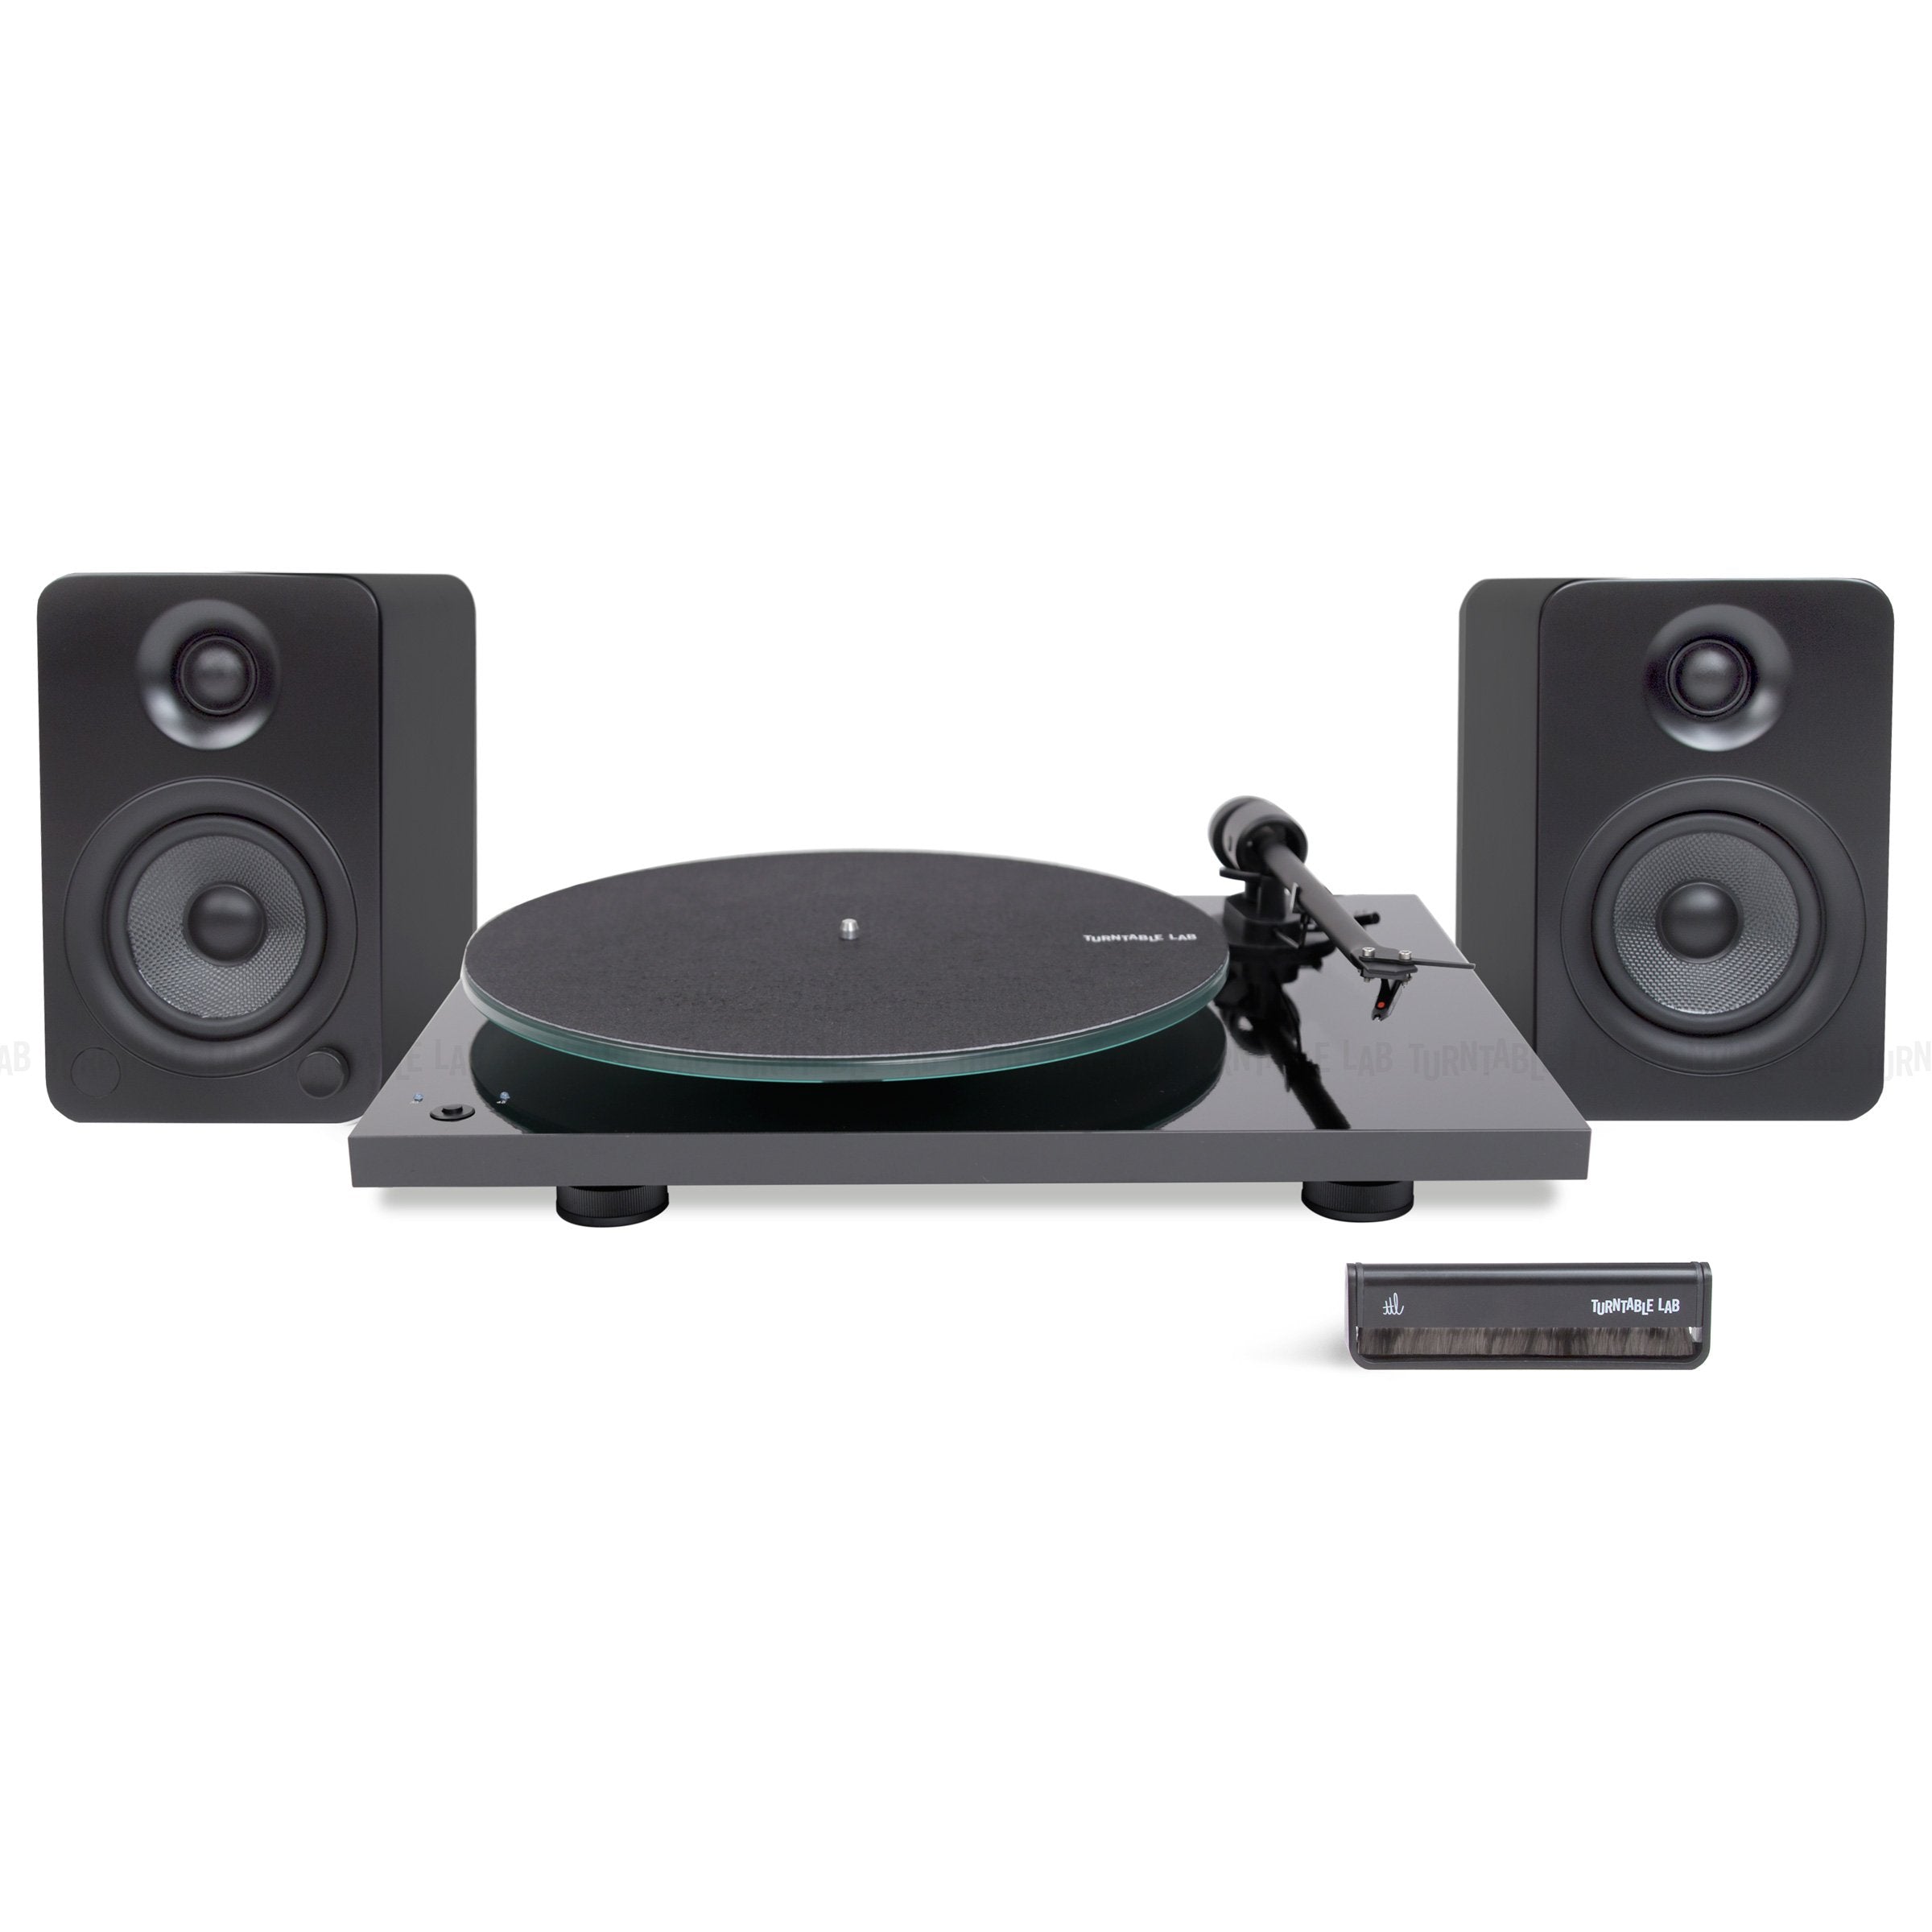 Pro-Ject: T1 Phono SB / Kanto YU4 / Turntable Package